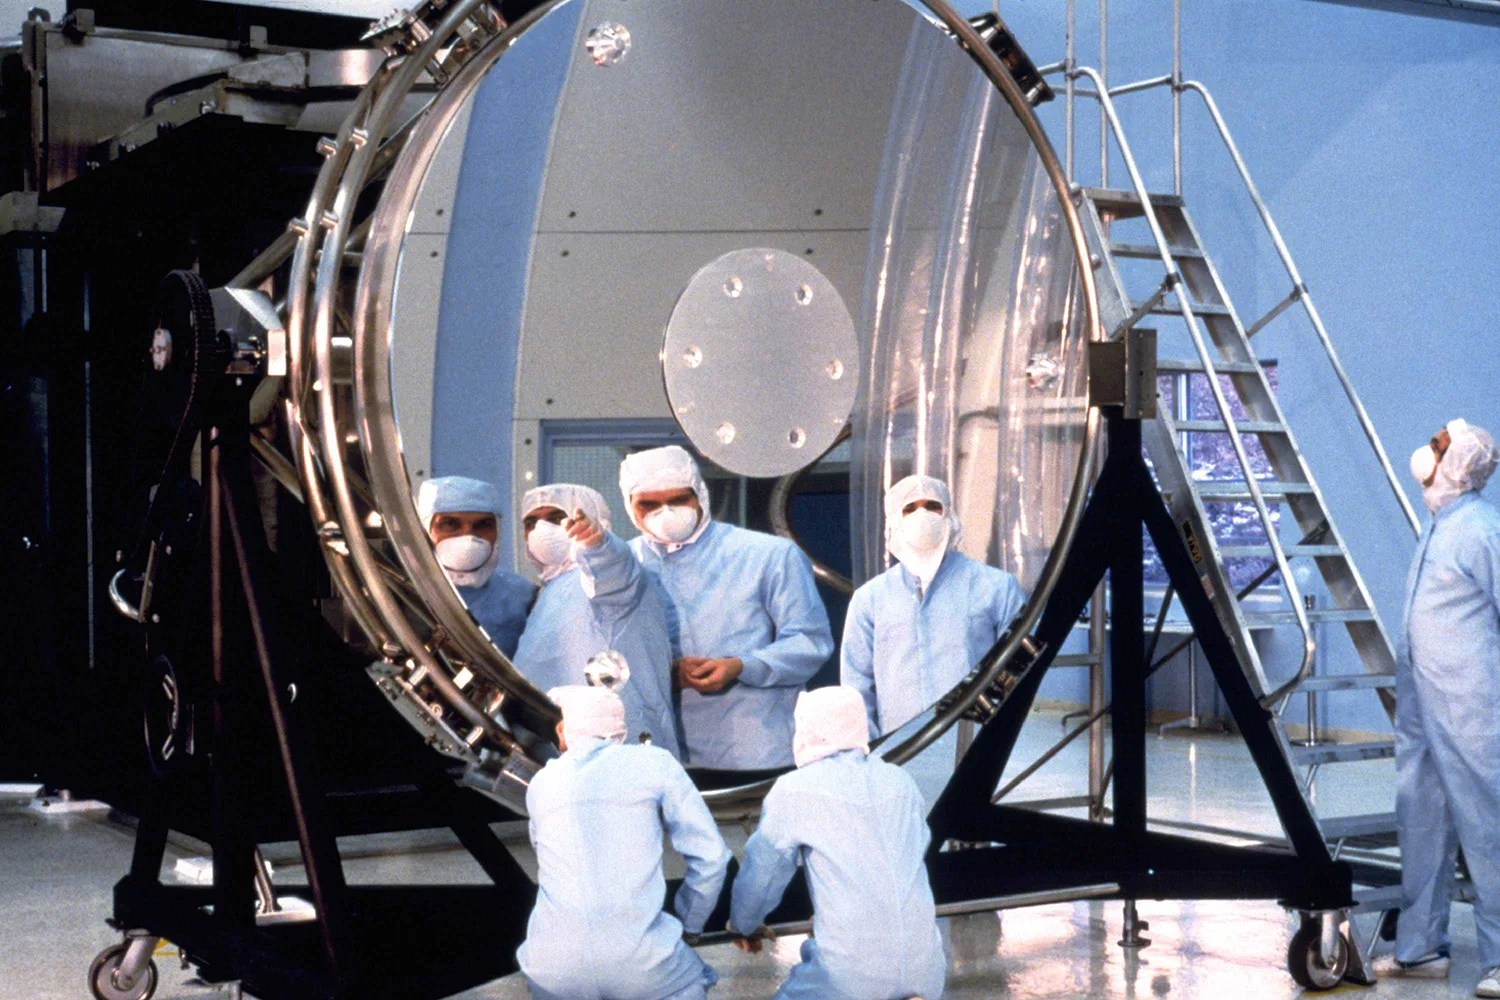 Technicians in blue suits, face masks, and head coverings look into Hubble's large primary mirror on a stand in a laboratory. They are reflected in the highly polished mirror.